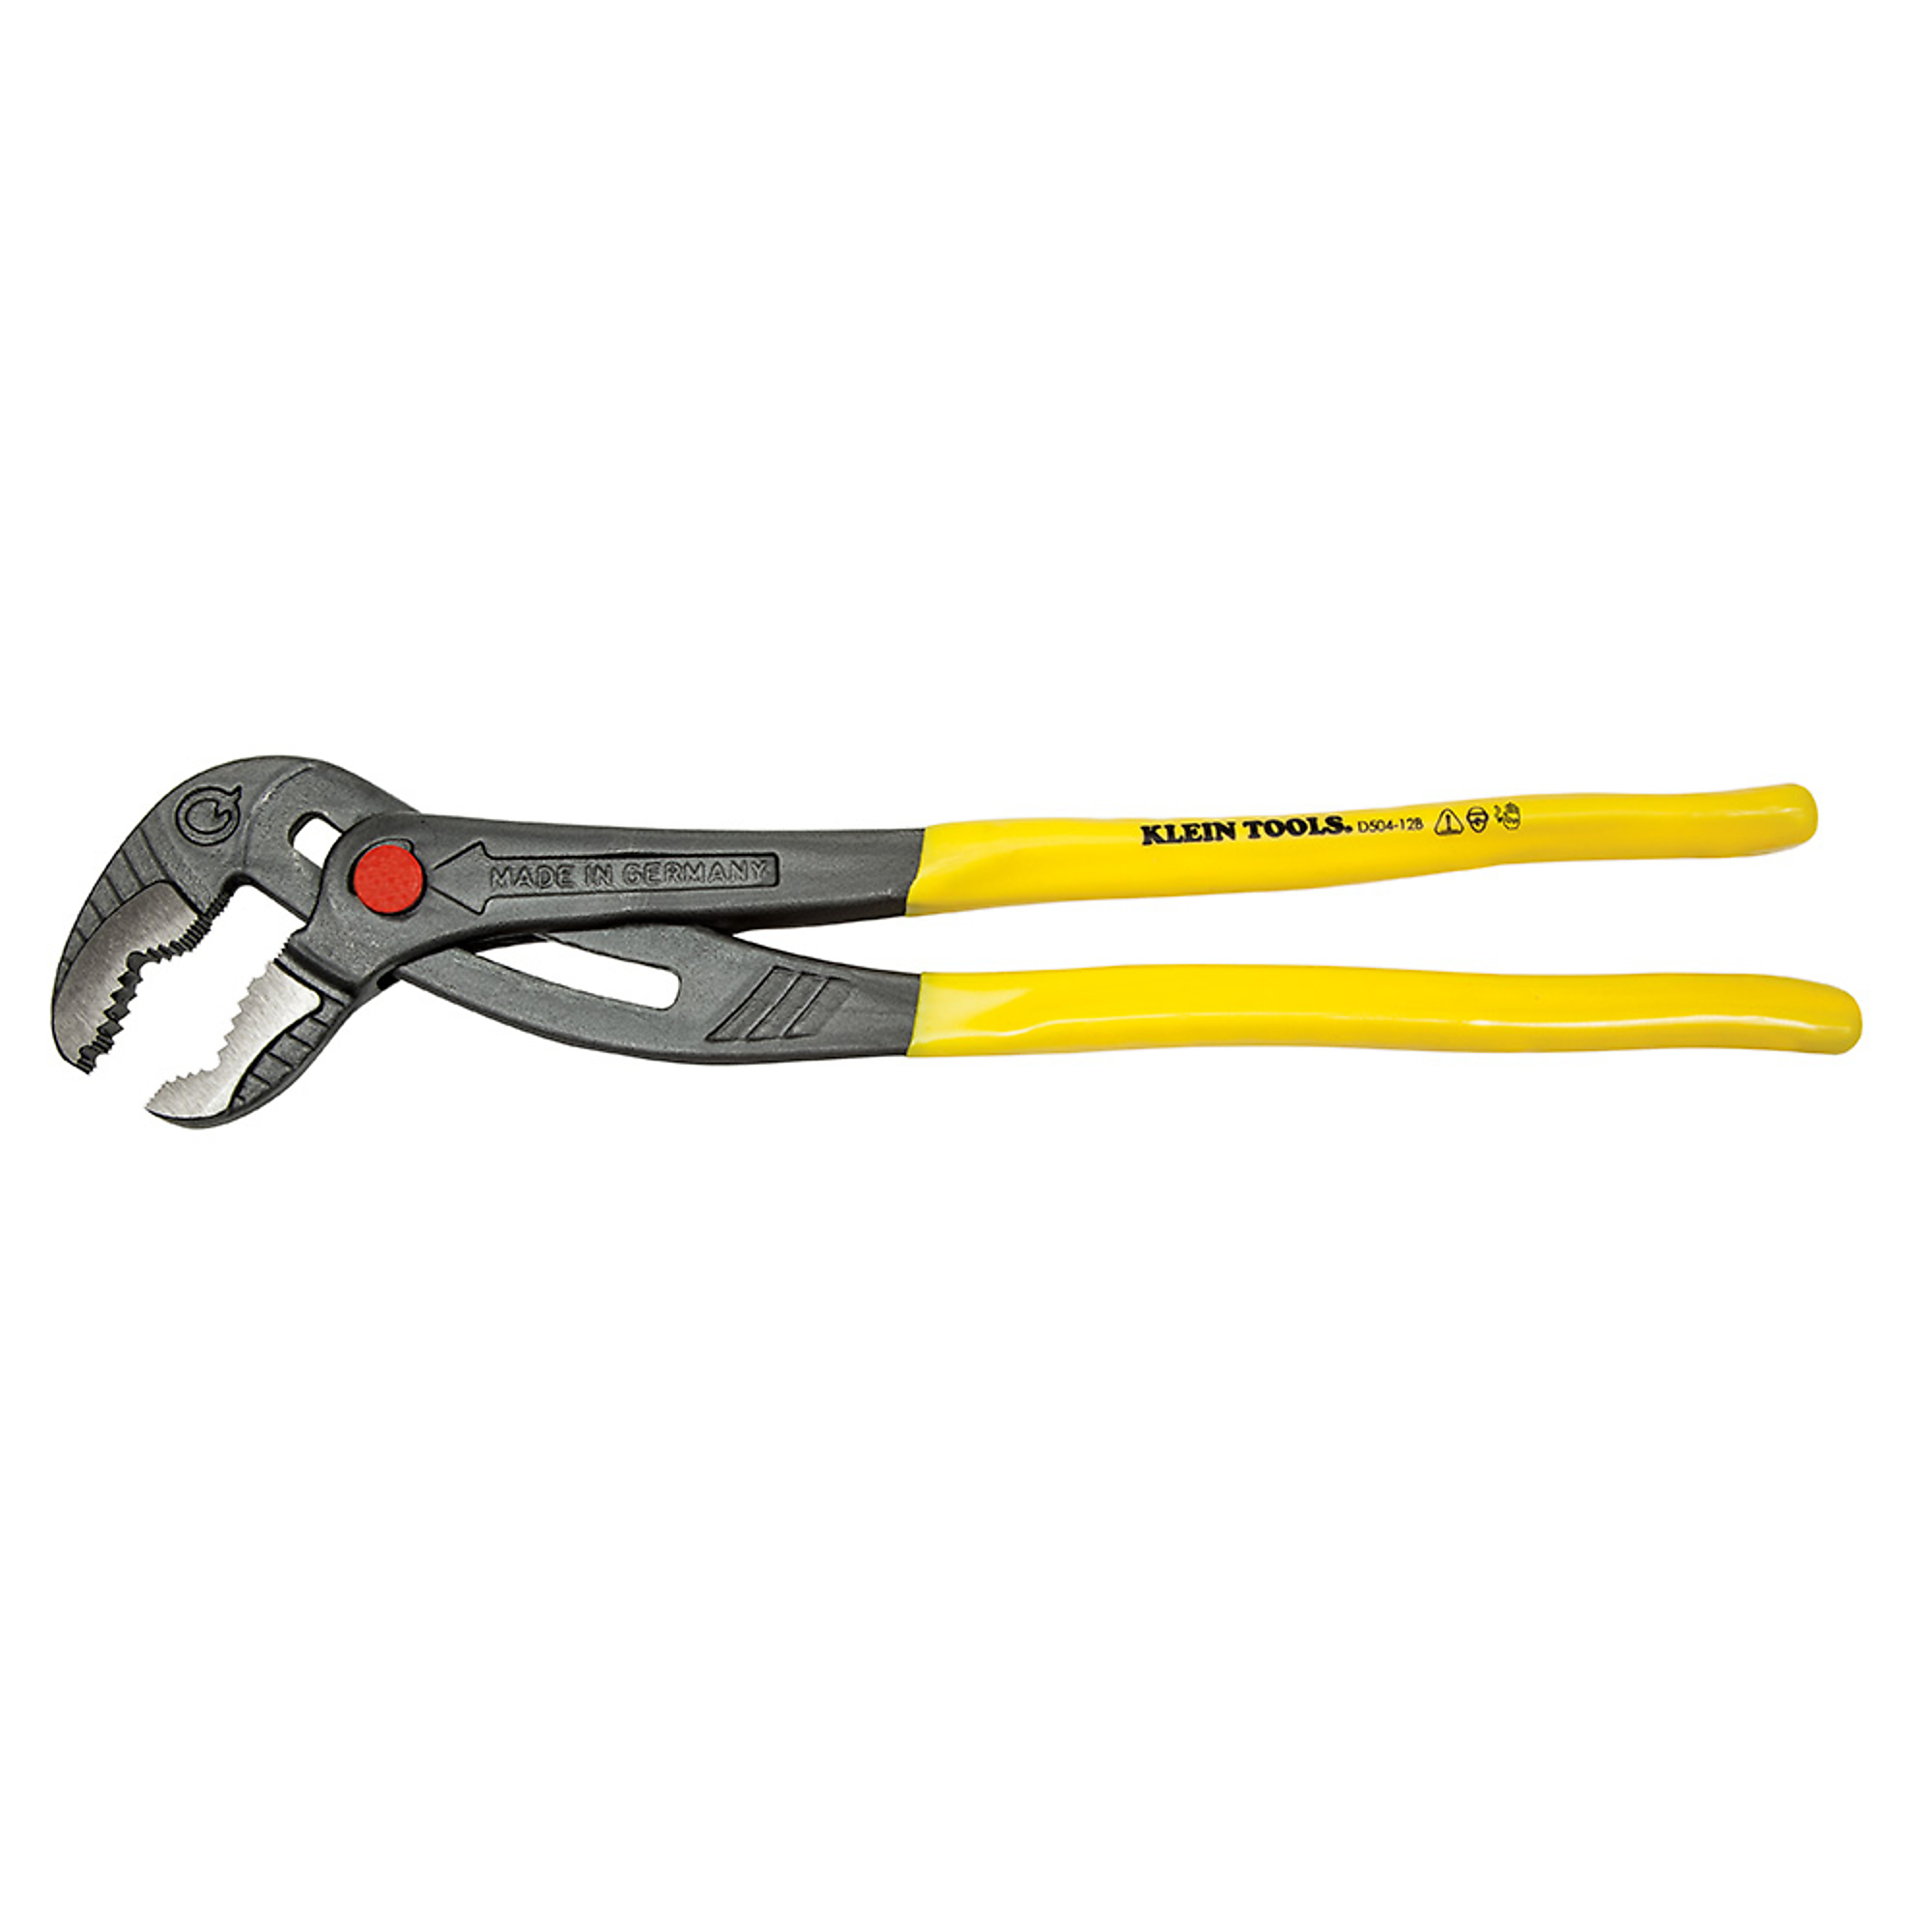 Klein Tools Klaw , 10Inch Quick-Adjust Klaw Pump Pliers, Pieces (qty.) 1 Material Steel, Jaw Capacity 2.13 in, Model D504-10B